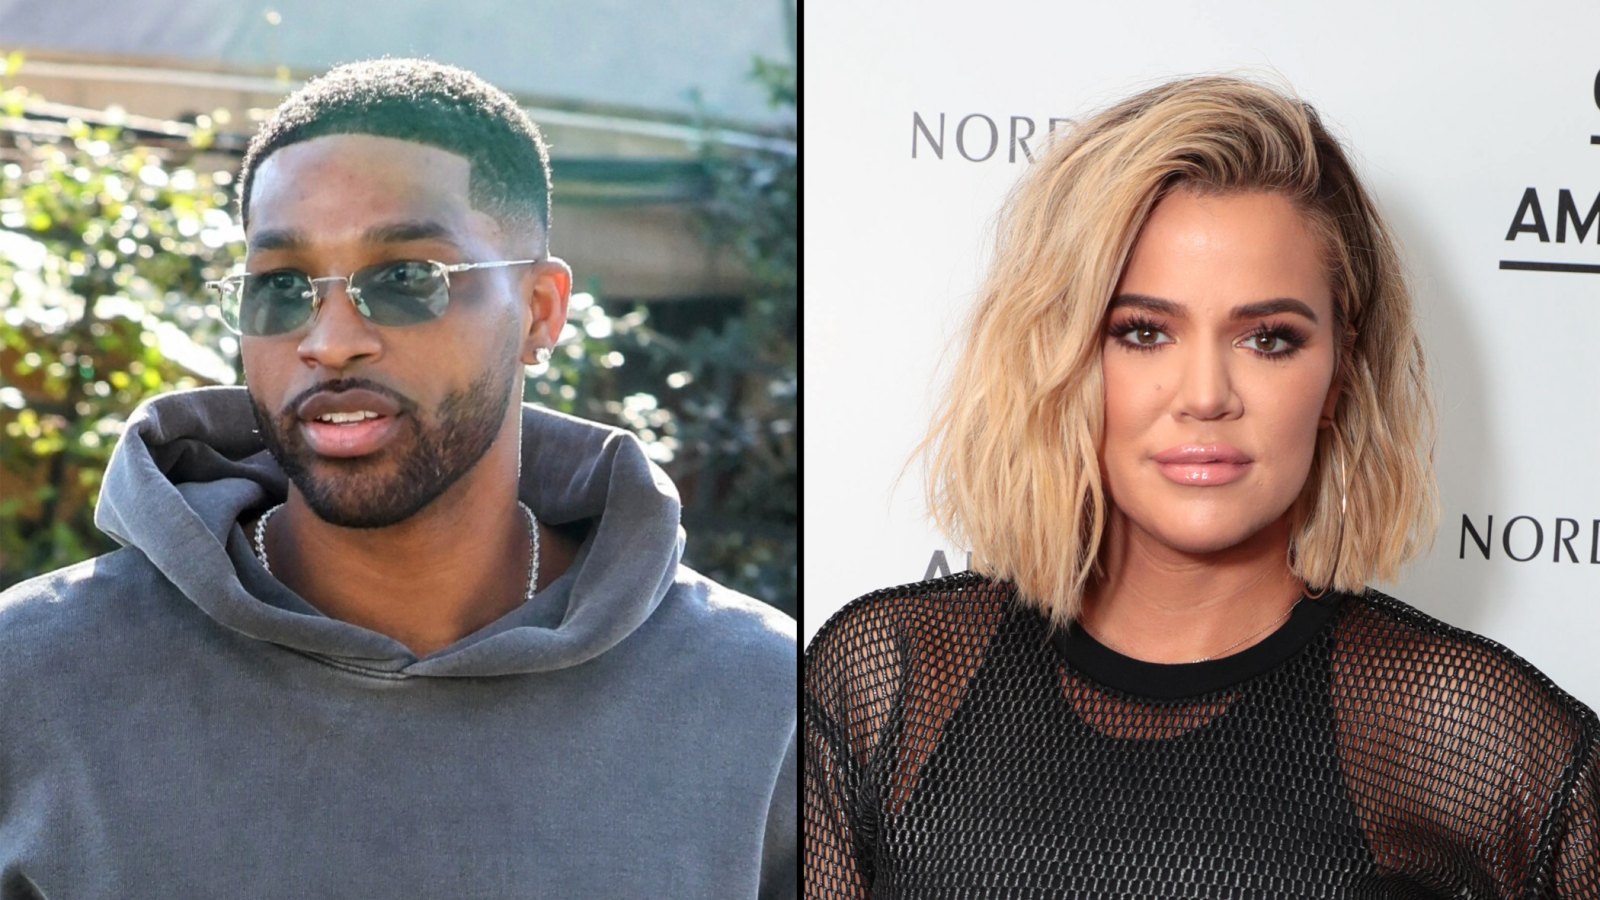 Tristan Thompson Is Happy to Be ‘So Close to Khloe Kardashian and the Kids’ After Joining Lakers